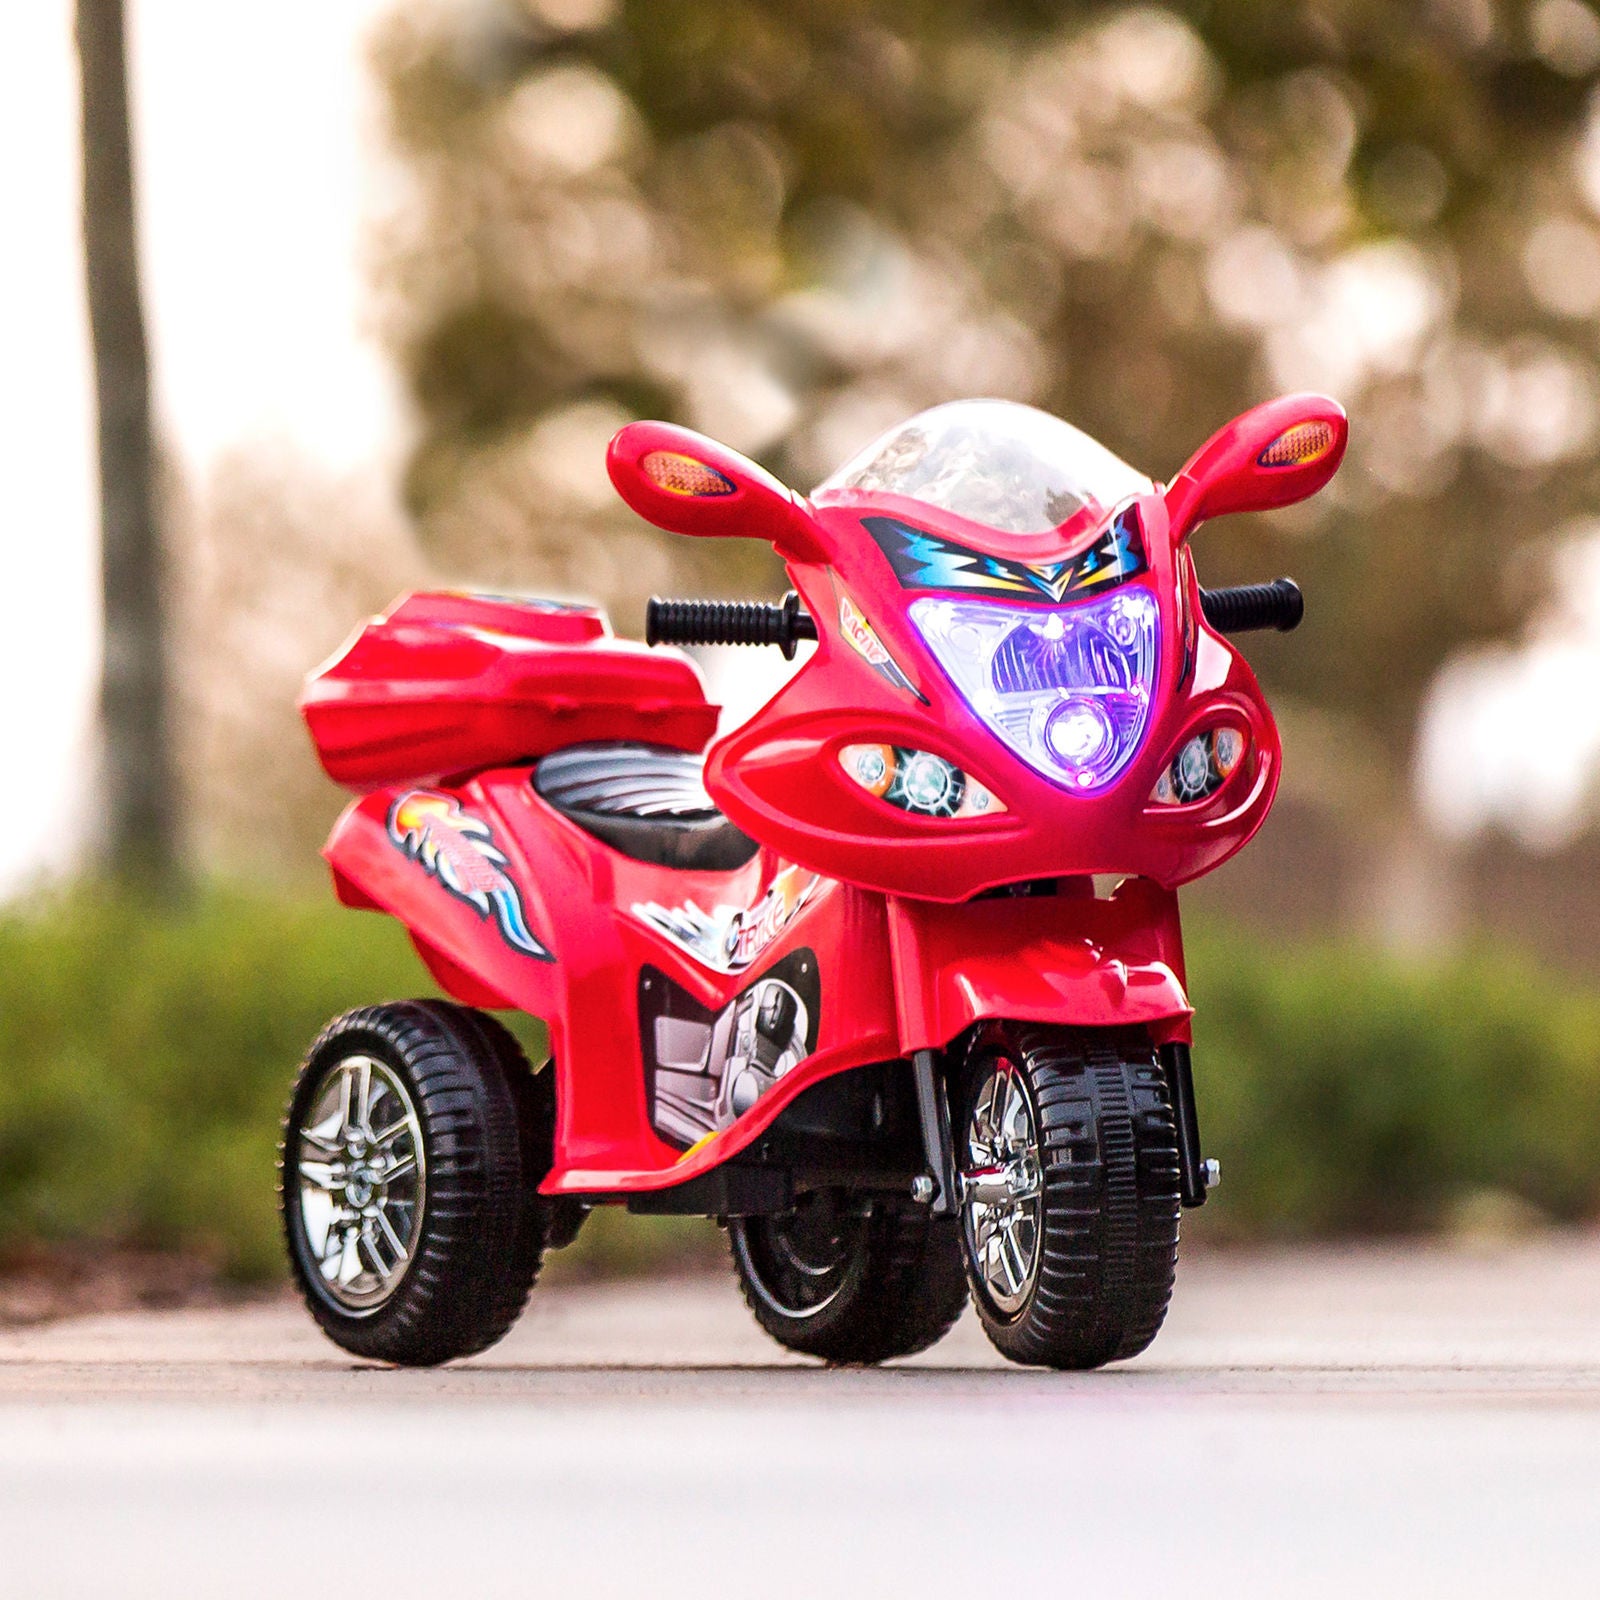 Cool Ride  3-Wheel Motorcycle For Kids - LIGHTS, MUSIC, HORN, STORAGE.